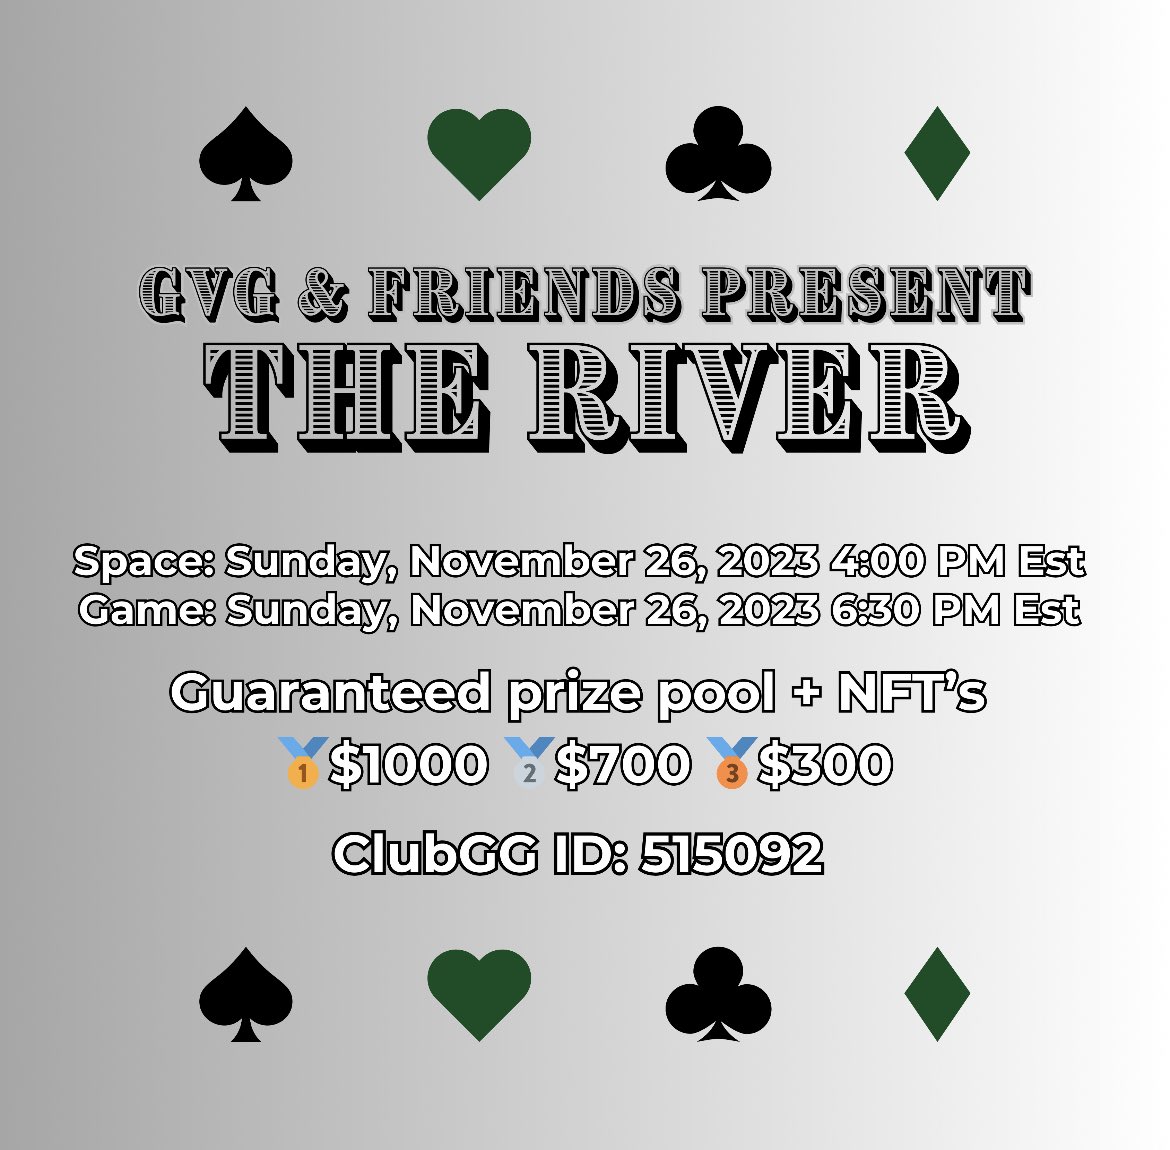 Quit Missing Out!!! This Weekend is the Finale!!! The Biggest Freeroll to hit Web3!!! Wake up People!!! @GreenVisorGang Bringin the 🔥!!! 10+ #NFTCommunities with some of the best poker players will be on the Felts. Come bring your “A” Game and maybe you can walk away with 1K!!!